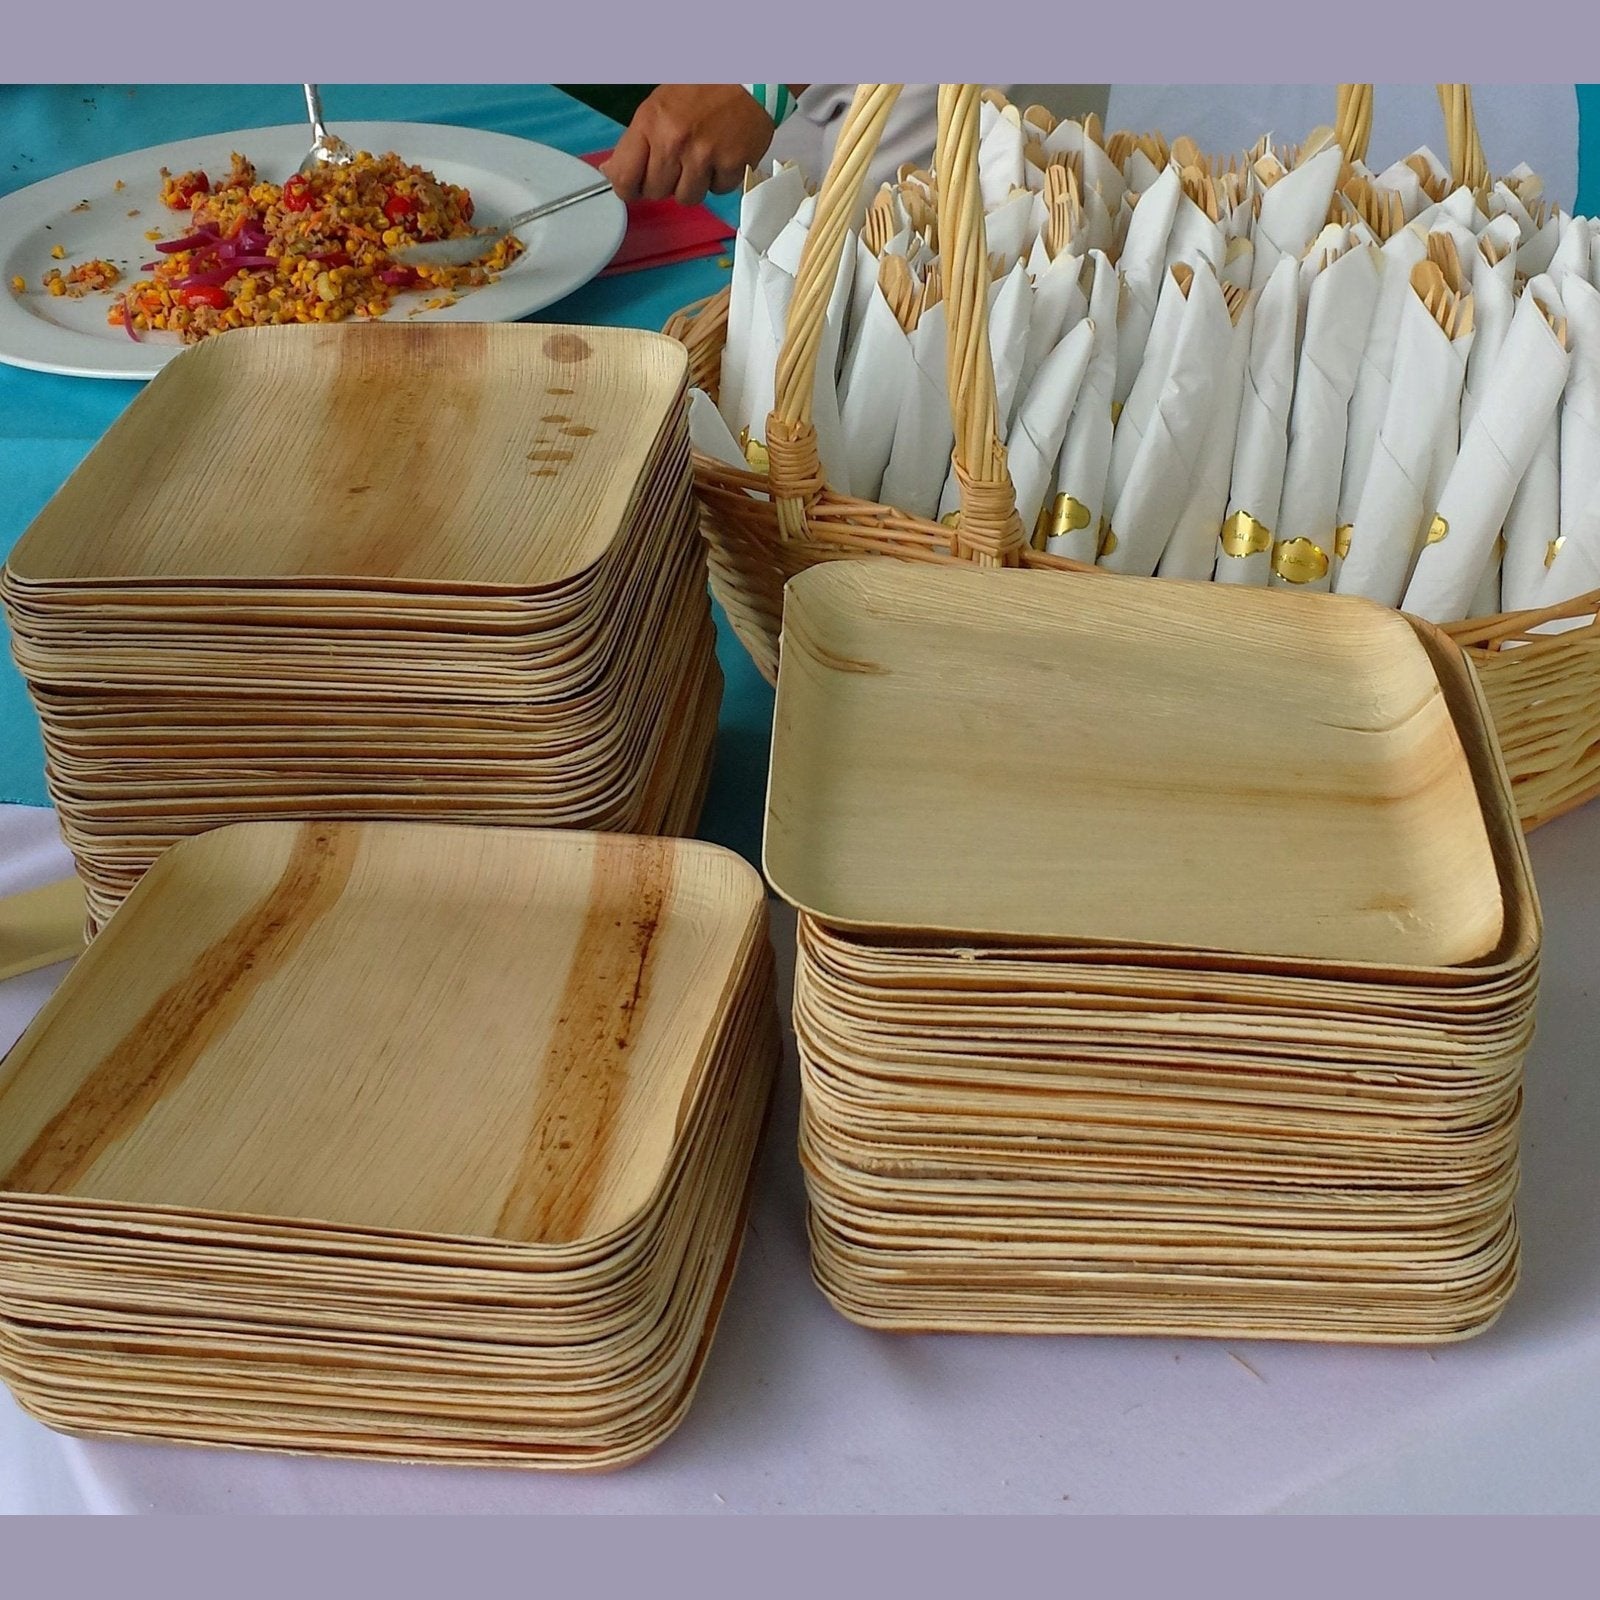 Simplify Your Life with bamboo plates disposable: No More Dish Duty -  VerTerra Dinnerware